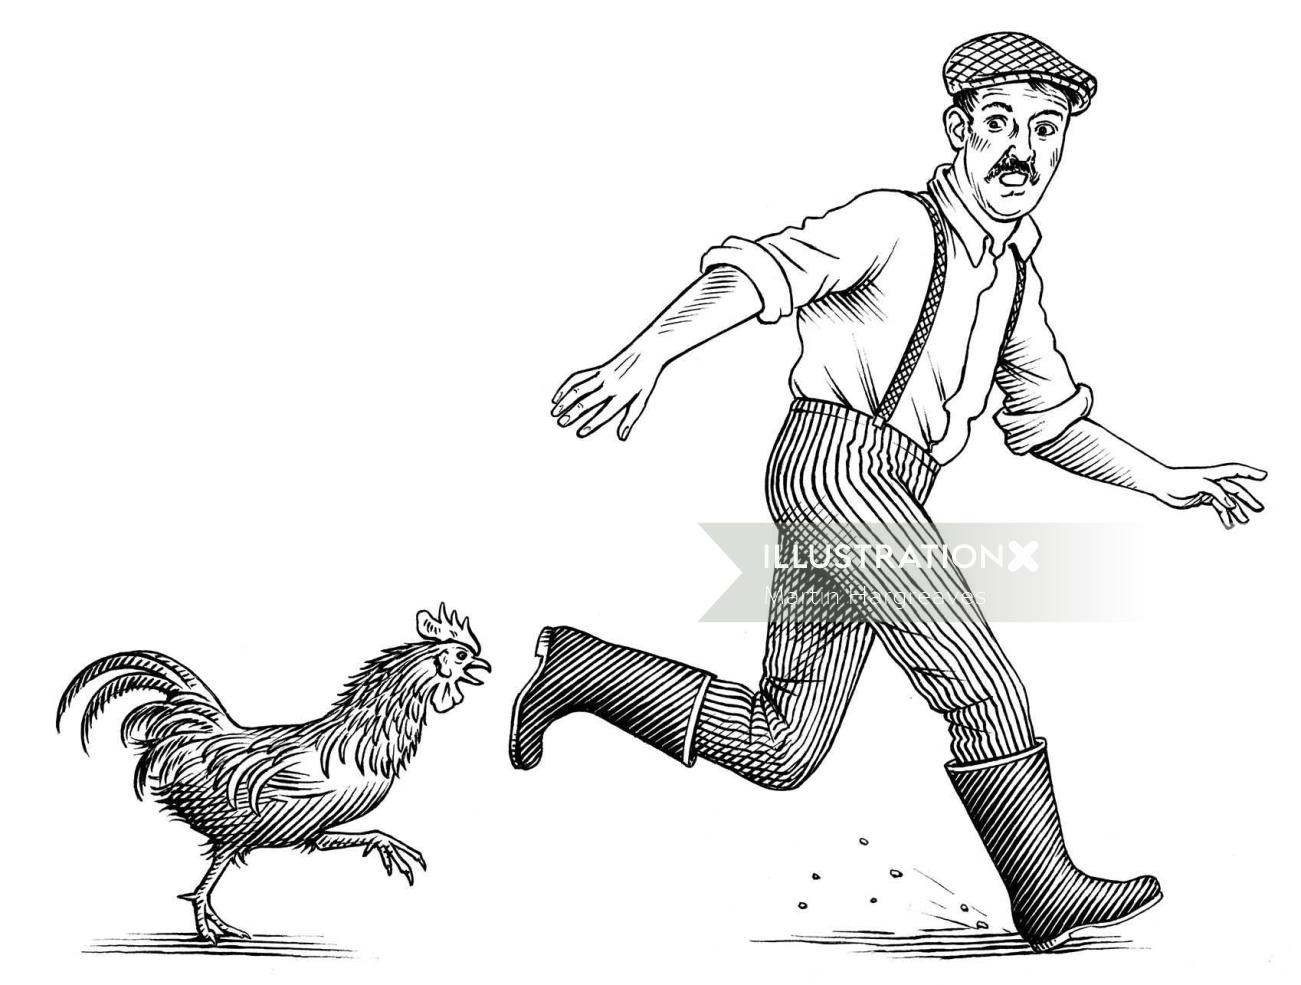 Black & White man running from rooster